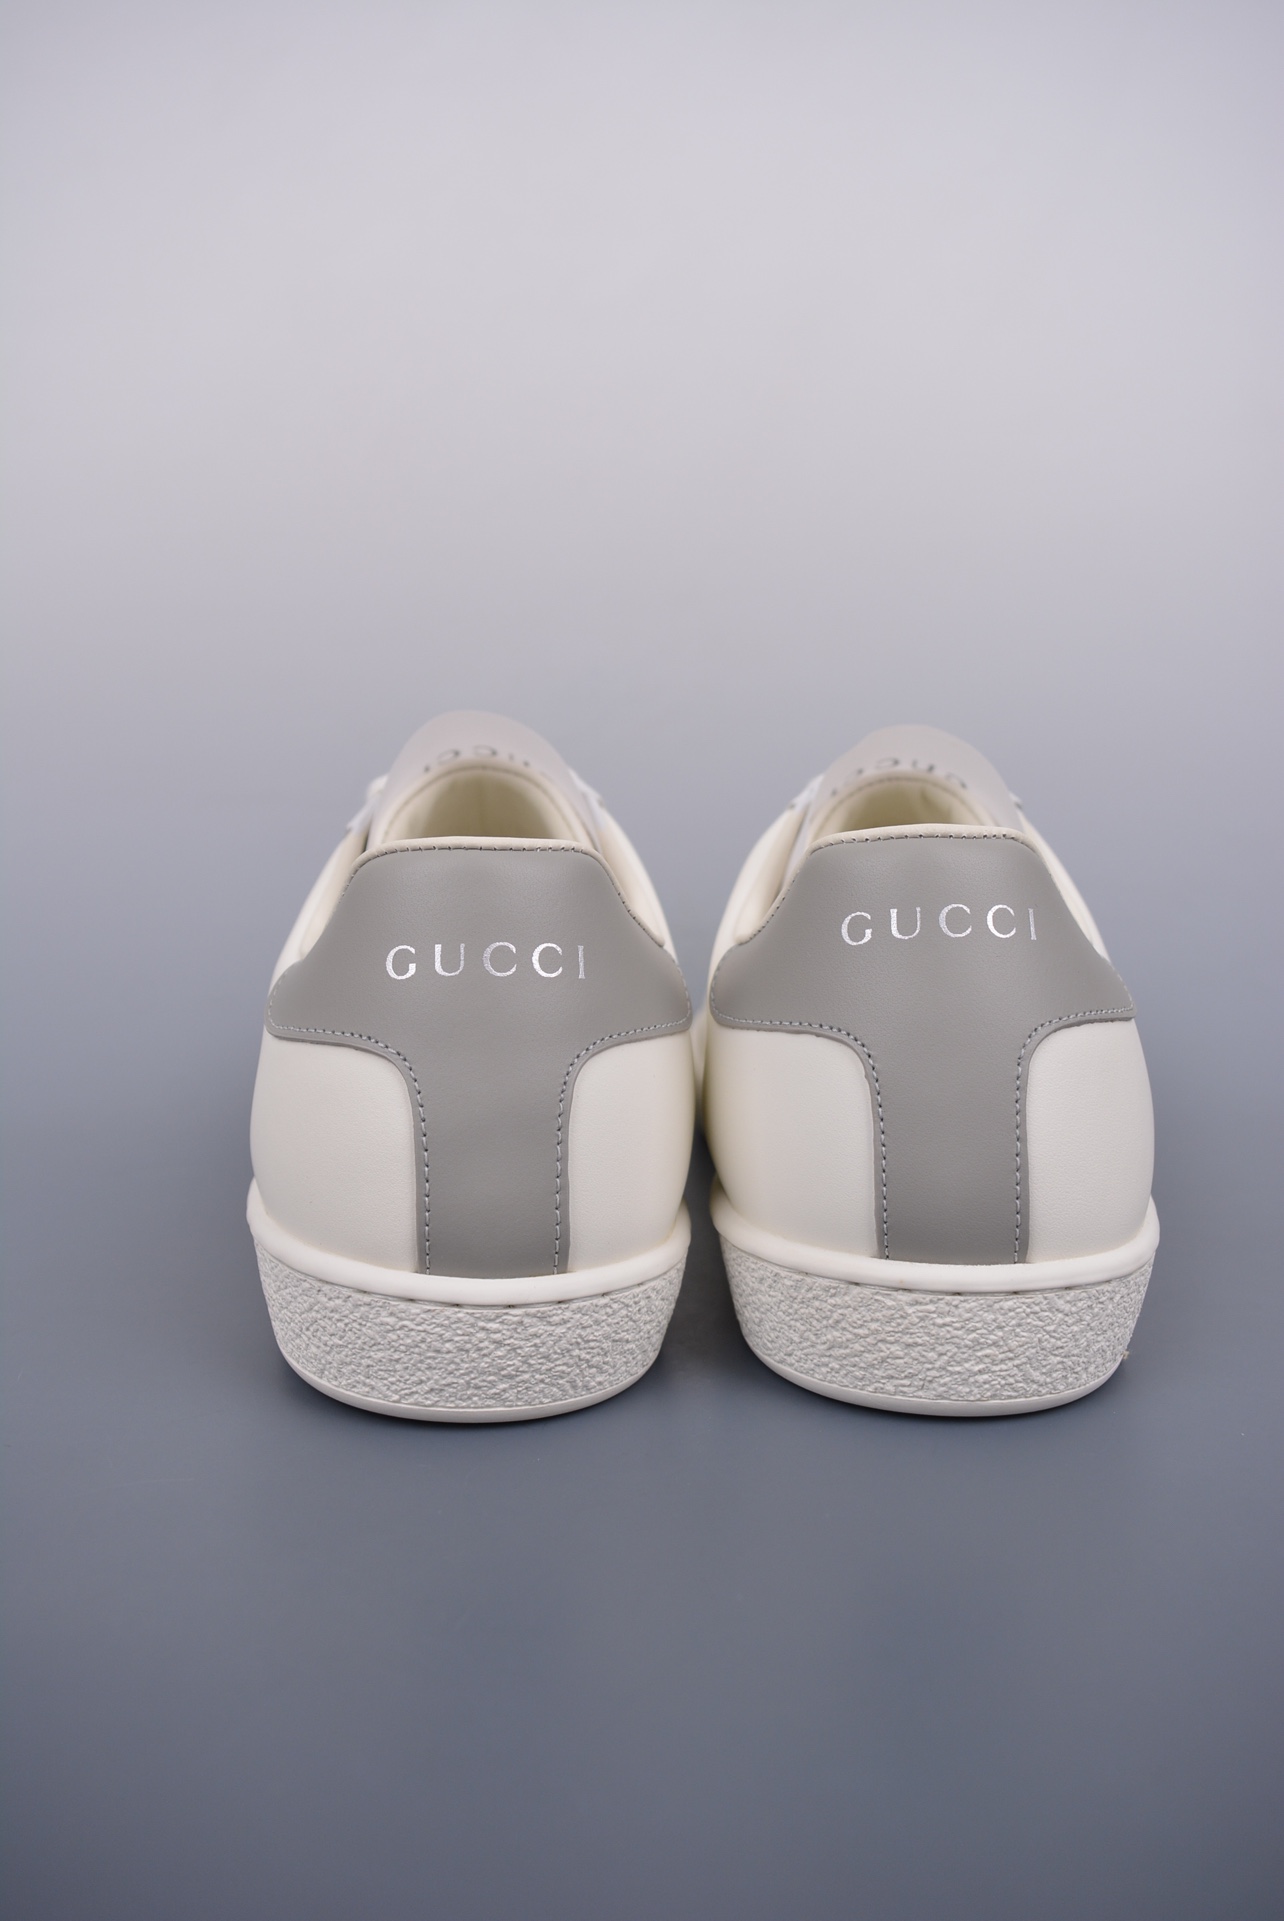 Italian fashion luxury brand Gucci Ace Embroidered Low-Top, pure original product from Guangdong